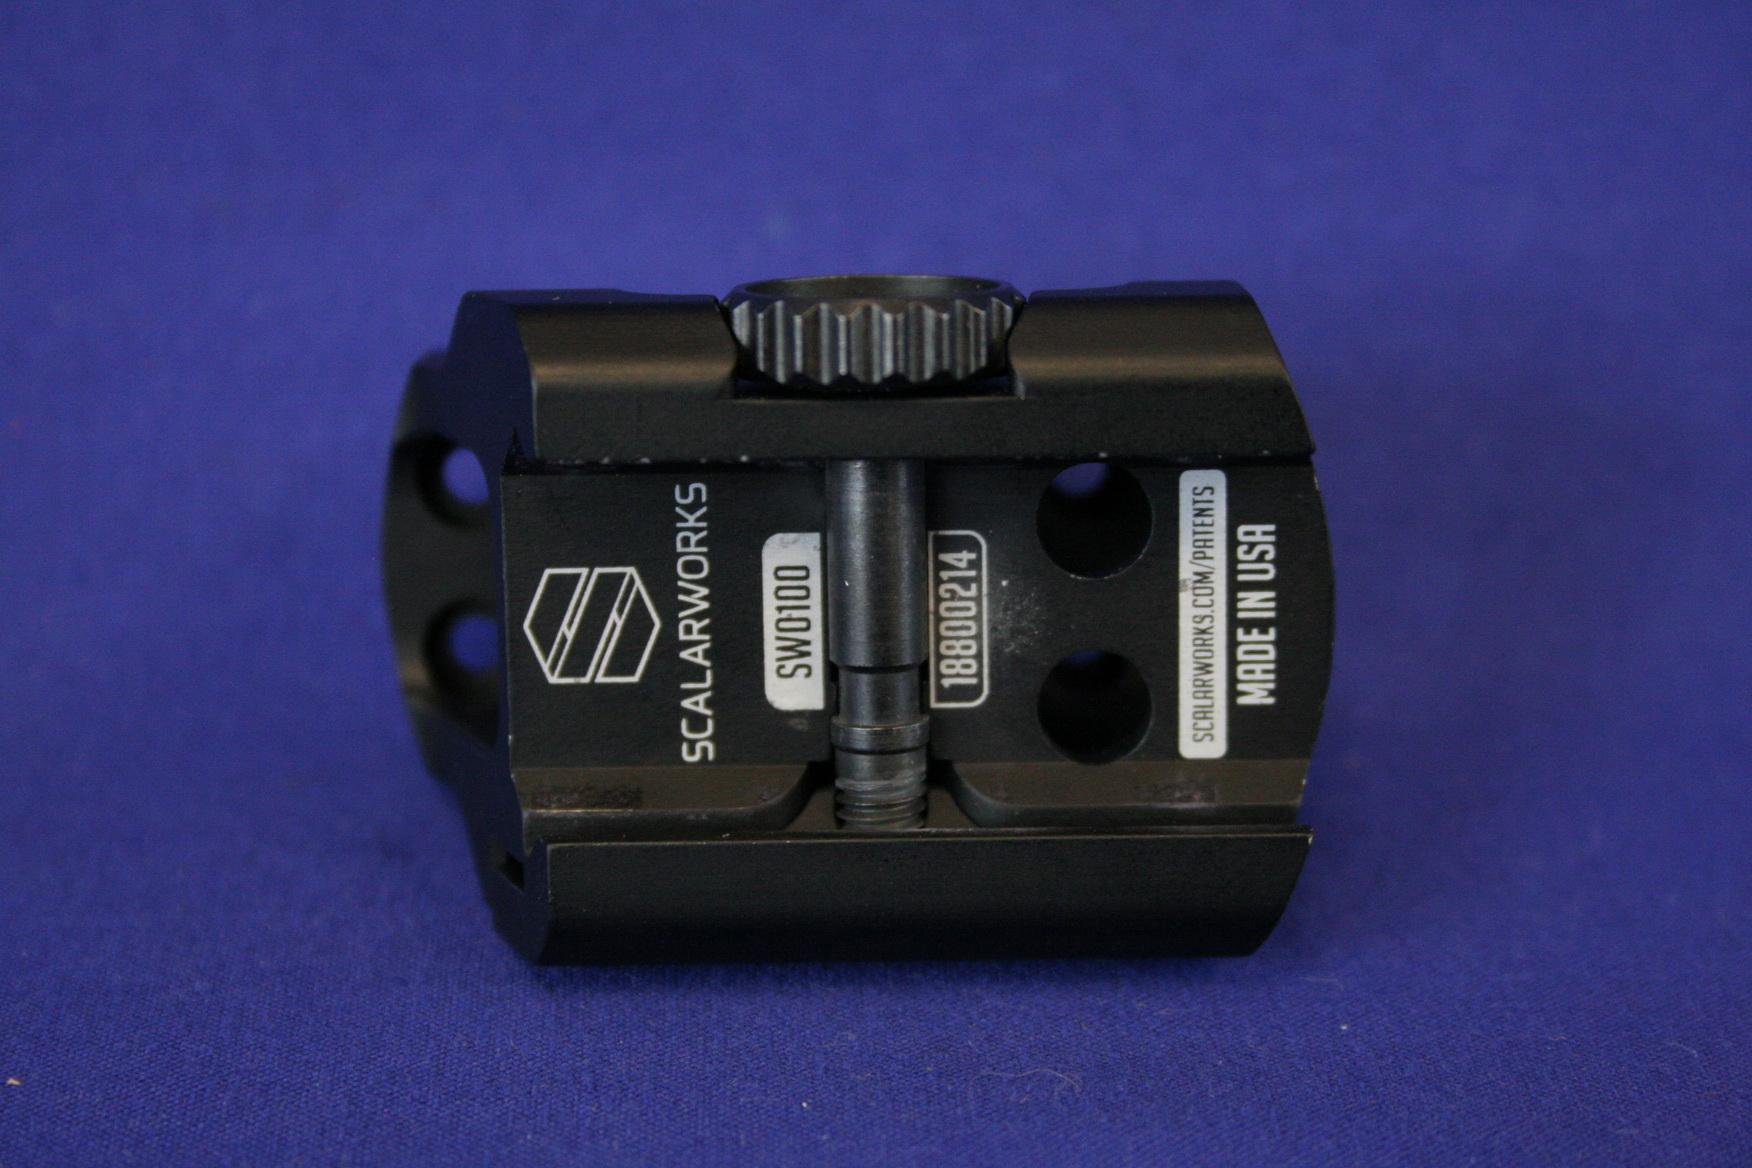 ScalarWorks Leap Aimpoint Micro Mount